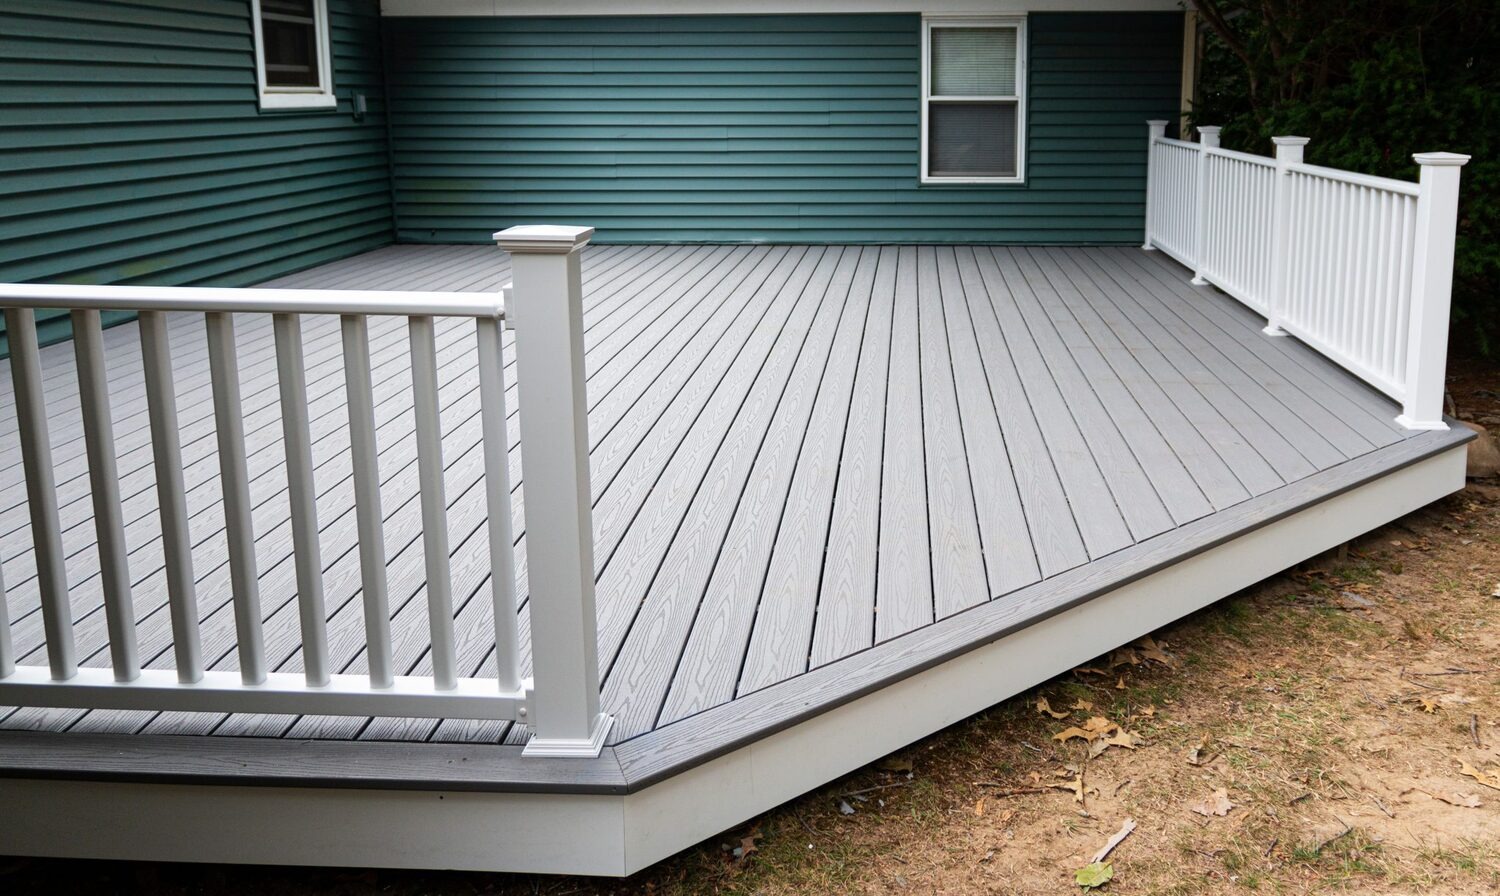 The porch builders Winnetka team's exceptional work resulted in a stunning wooden deck in the backyard